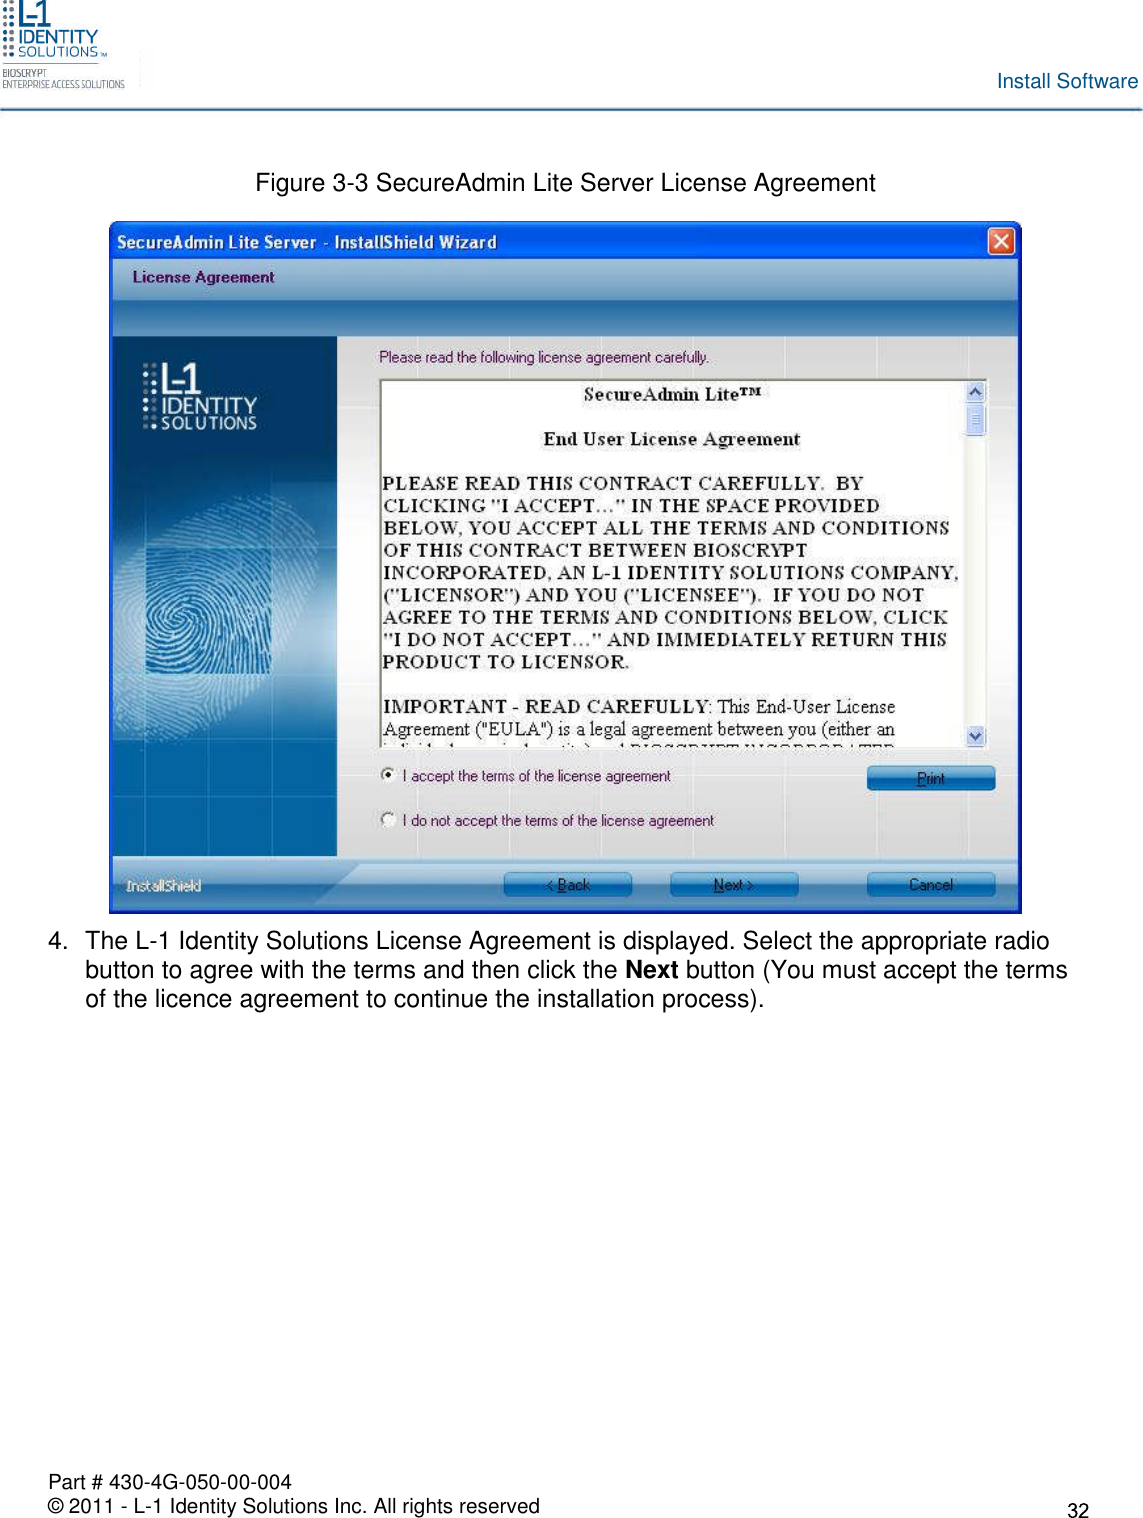 Part # 430-4G-050-00-004© 2011 - L-1 Identity Solutions Inc. All rights reservedInstall SoftwareFigure 3-3 SecureAdmin Lite Server License Agreement4. The L-1 Identity Solutions License Agreement is displayed. Select the appropriate radiobutton to agree with the terms and then click the Next button (You must accept the termsof the licence agreement to continue the installation process).